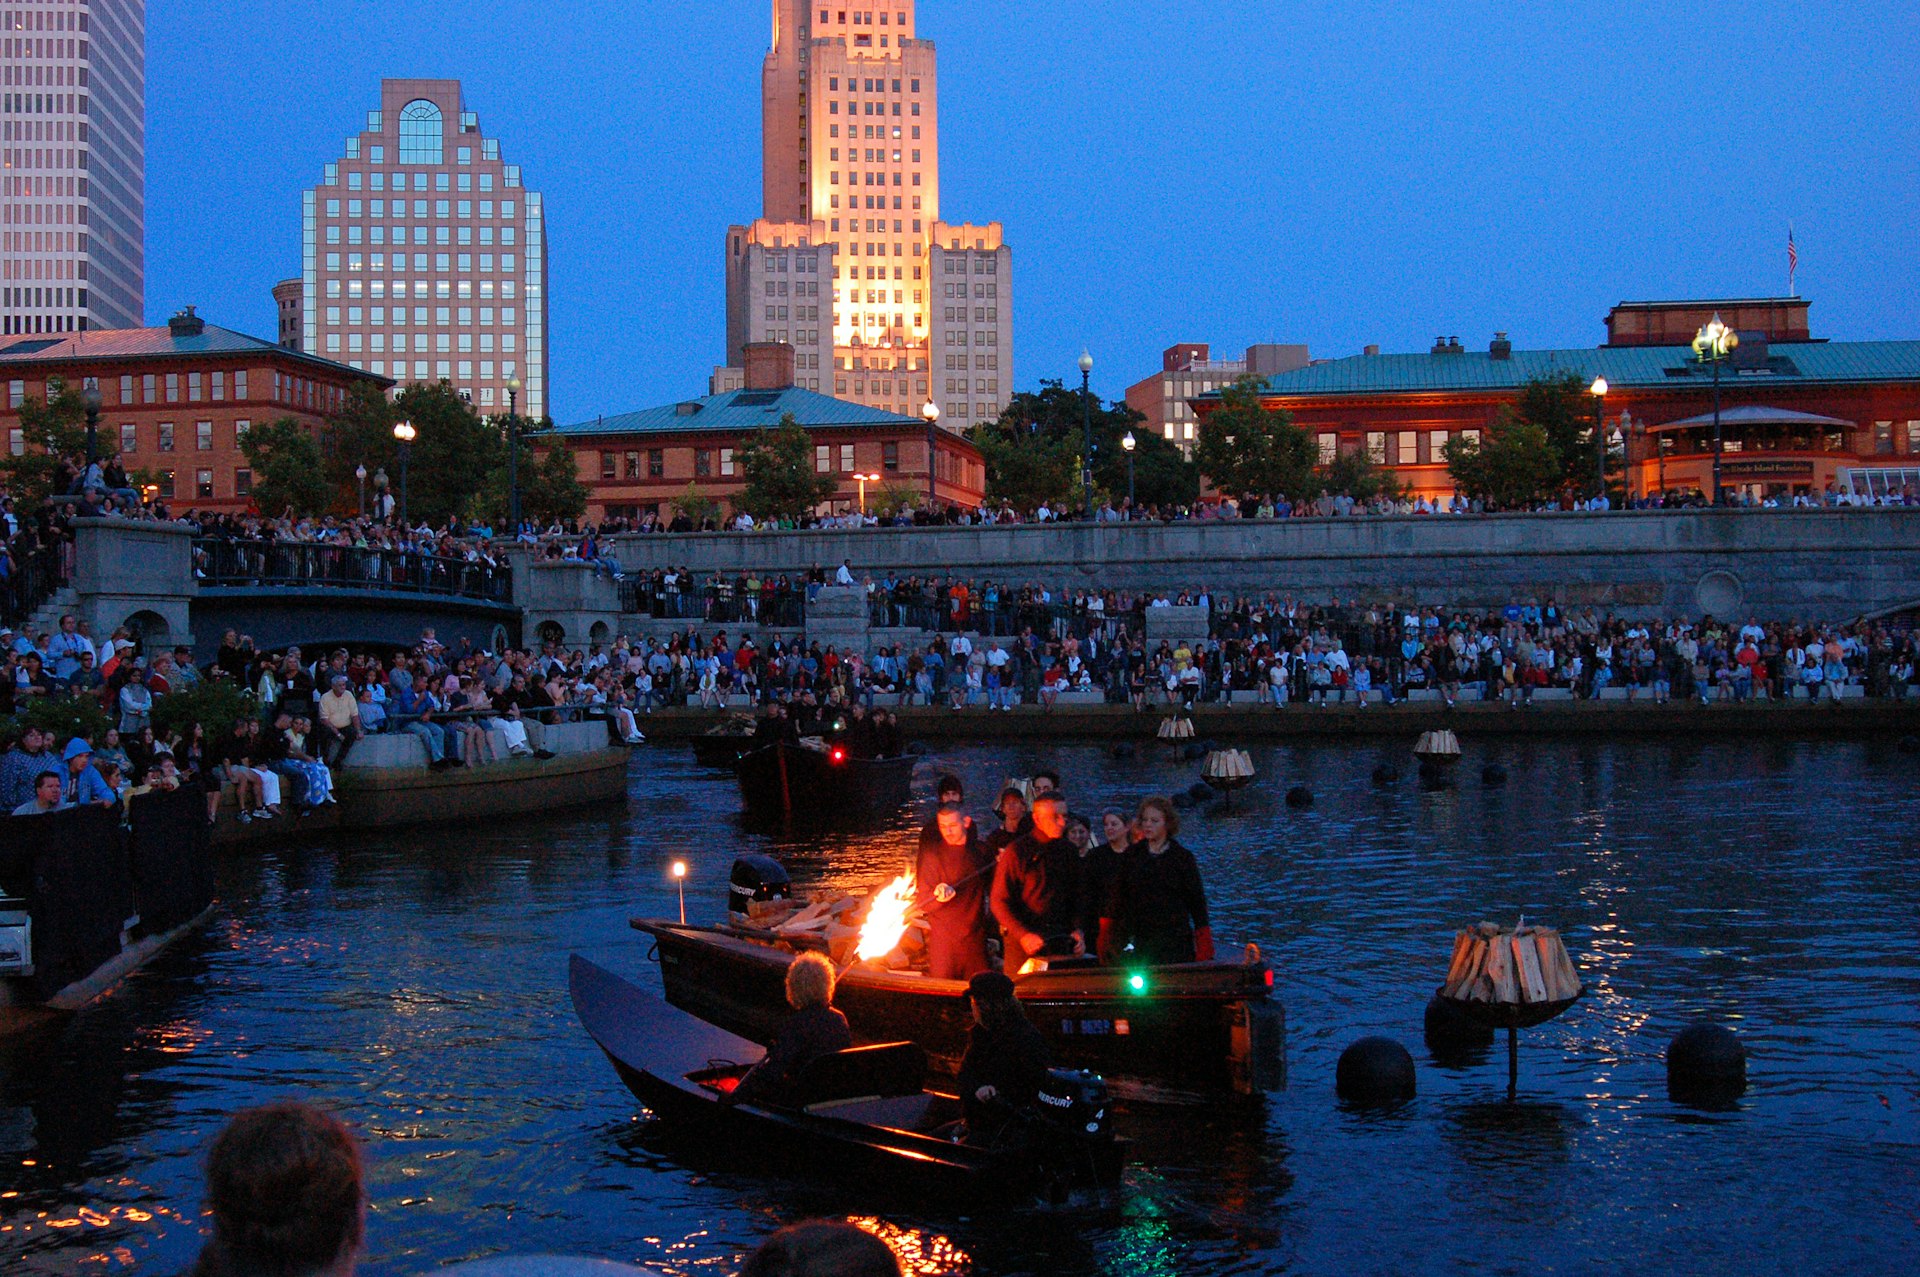 Bonfires are lit in the rivers of Providence Rhode Island, part of the Waterfire festivals.